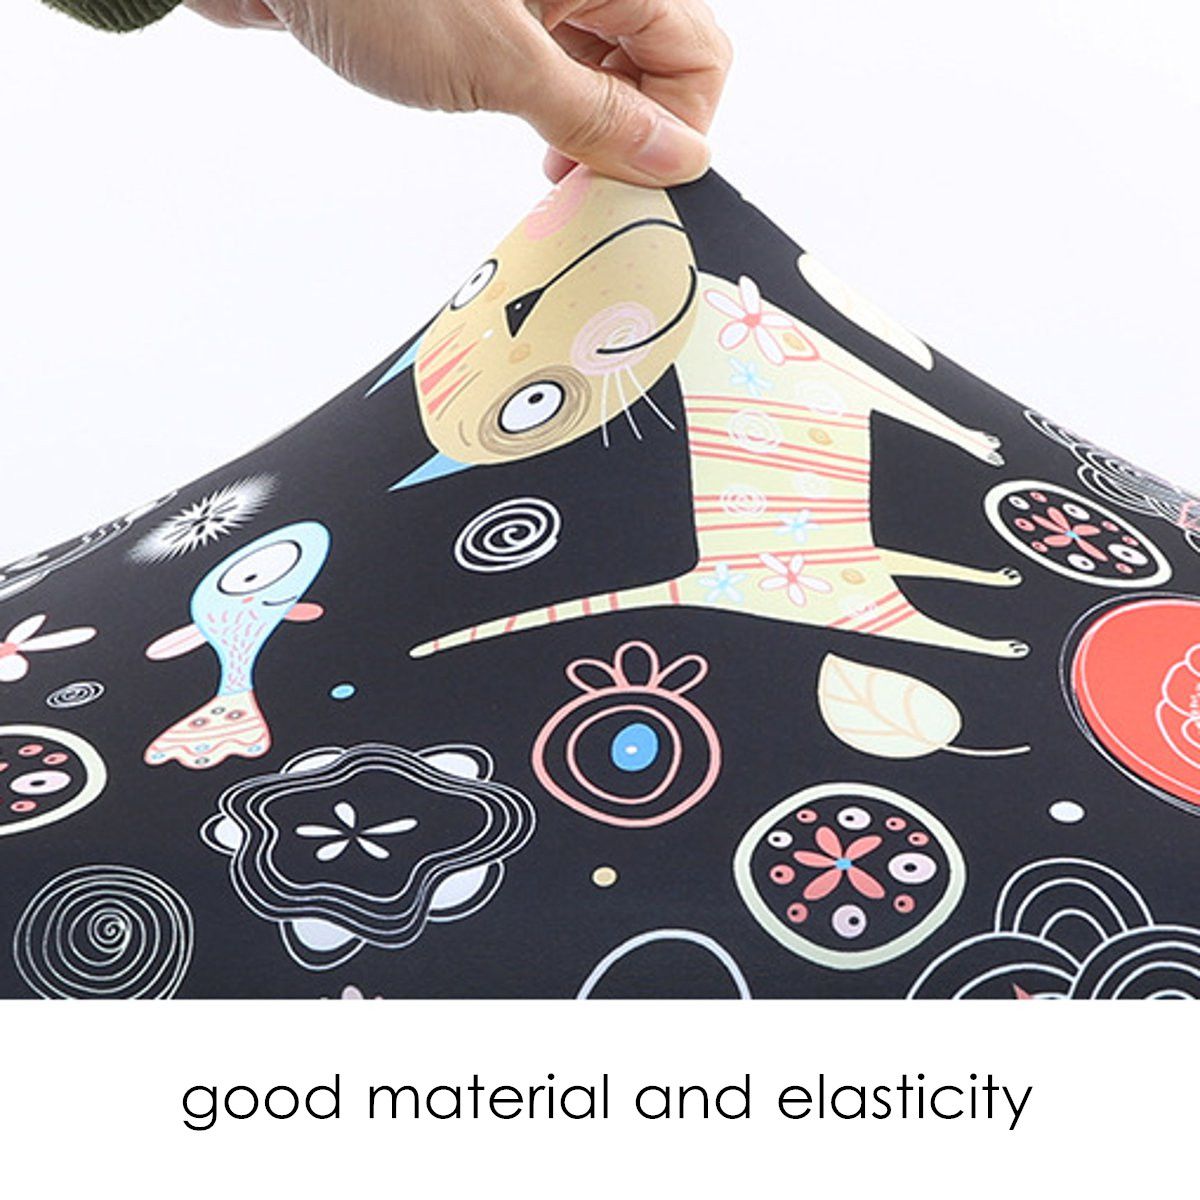 Multicolors-Elastic-Luggage-Cover-Travel-Suitcase-Protector-Dustproof-Protection-Trolley-Case-1465419